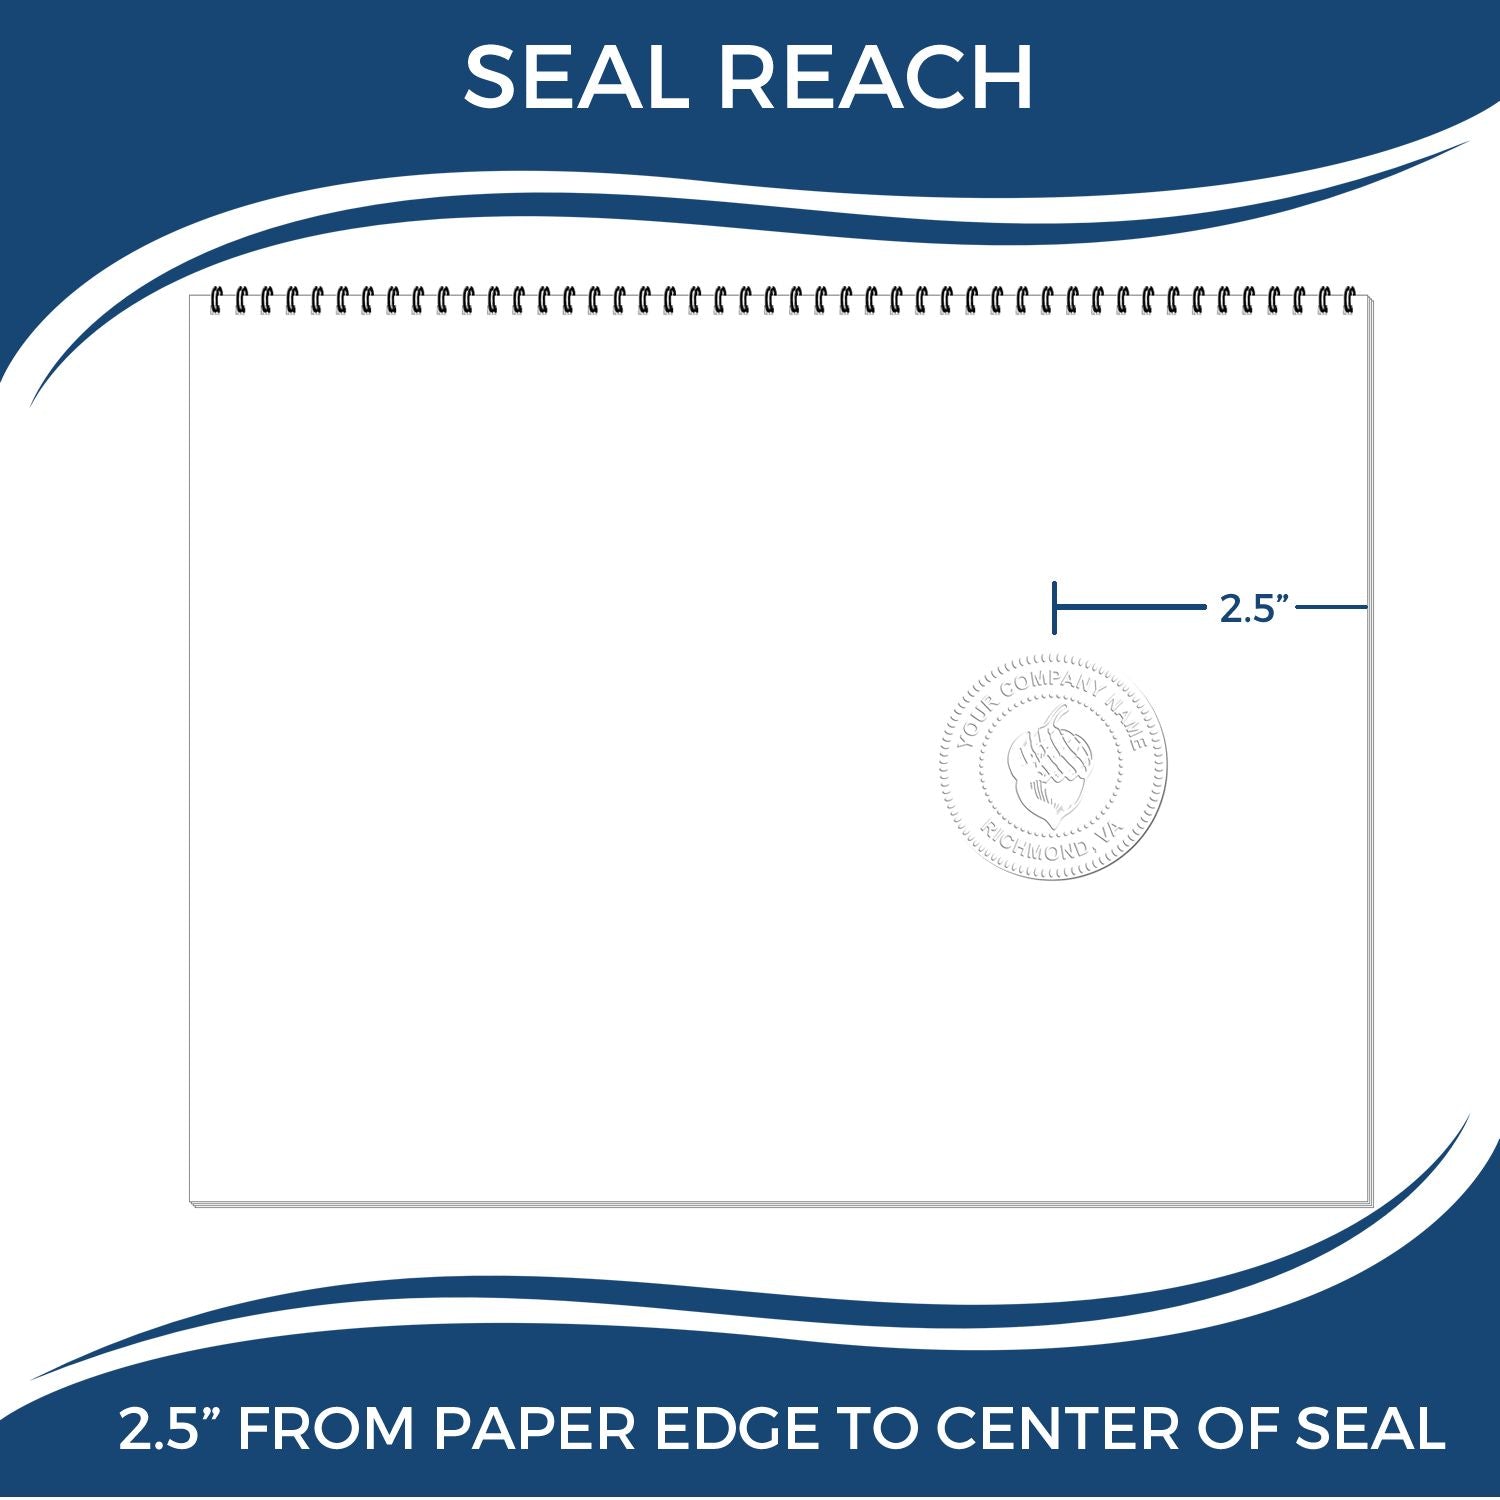 An infographic showing the seal reach which is represented by a ruler and a miniature seal image of the State of South Dakota Long Reach Architectural Embossing Seal